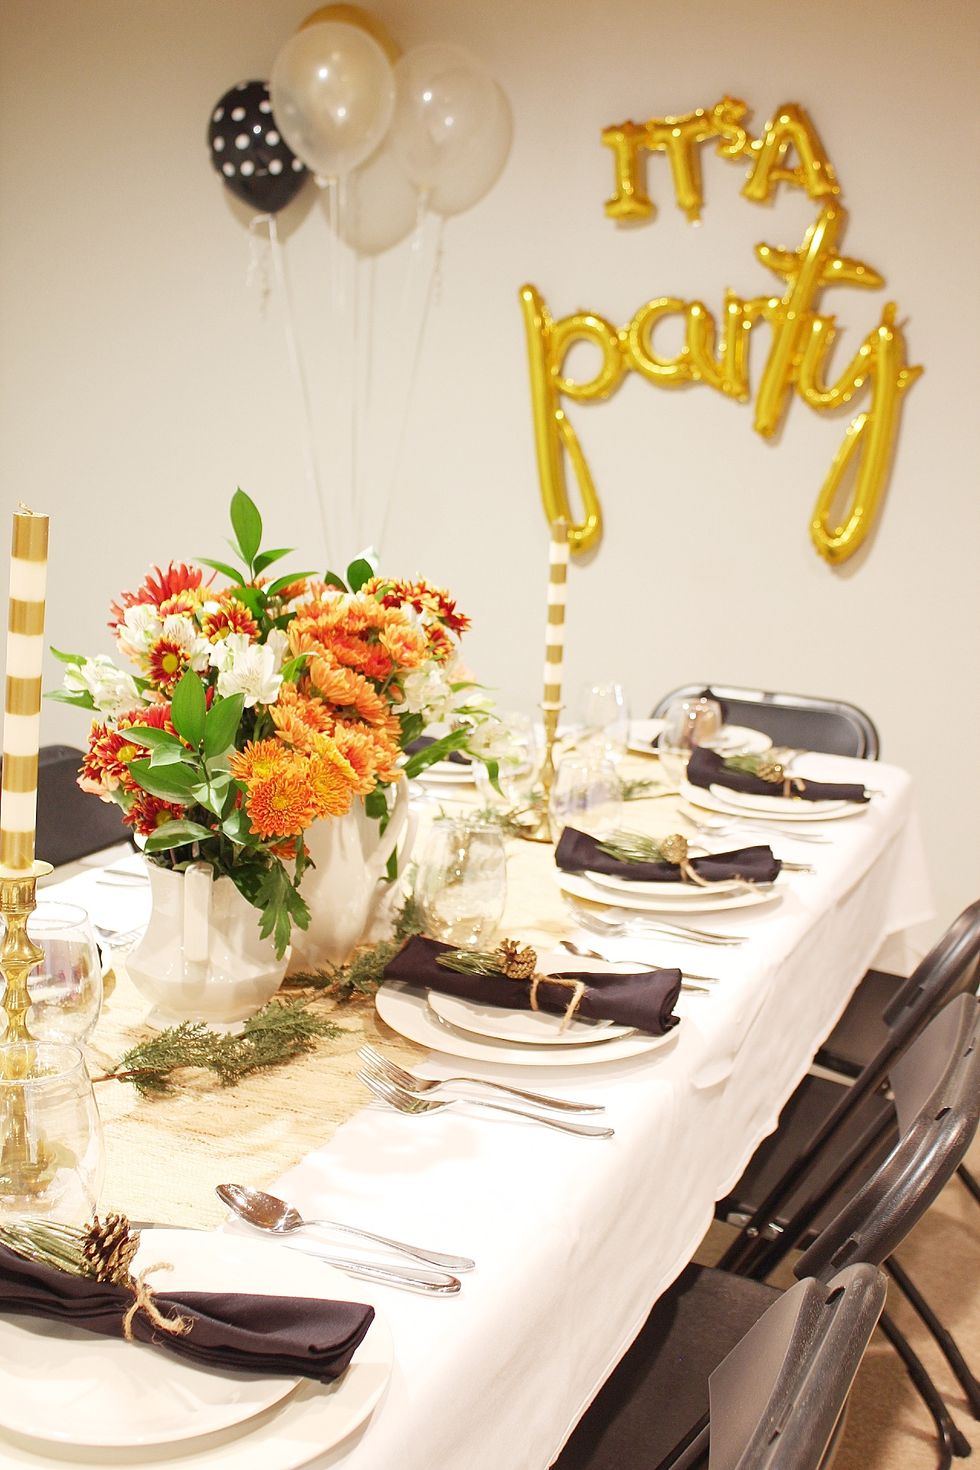 Tablescape with Balloons Centerpiece - Celebrations at Home